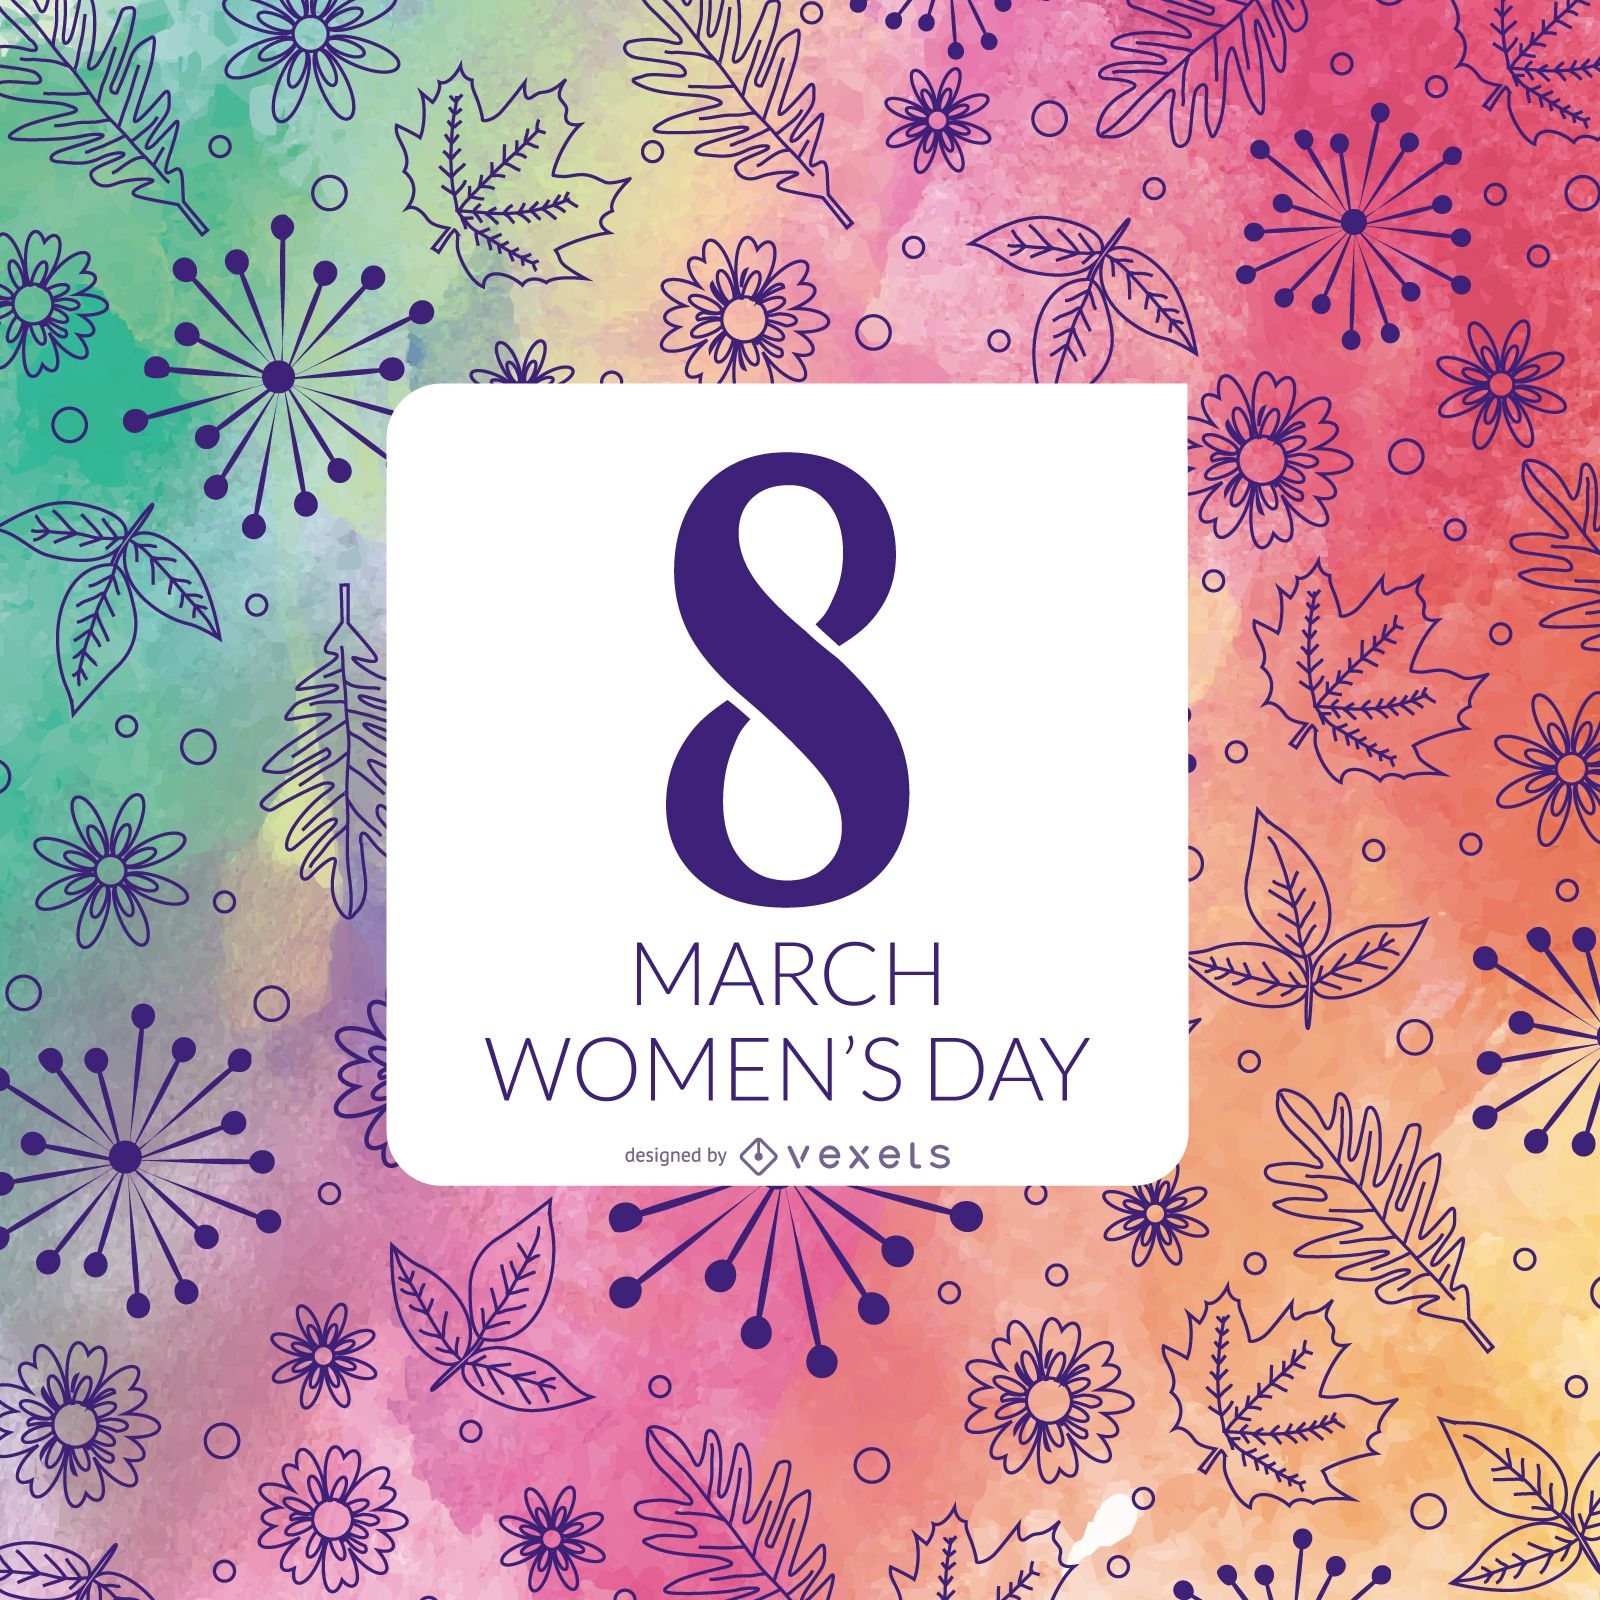 Floral watercolor Women's Day design